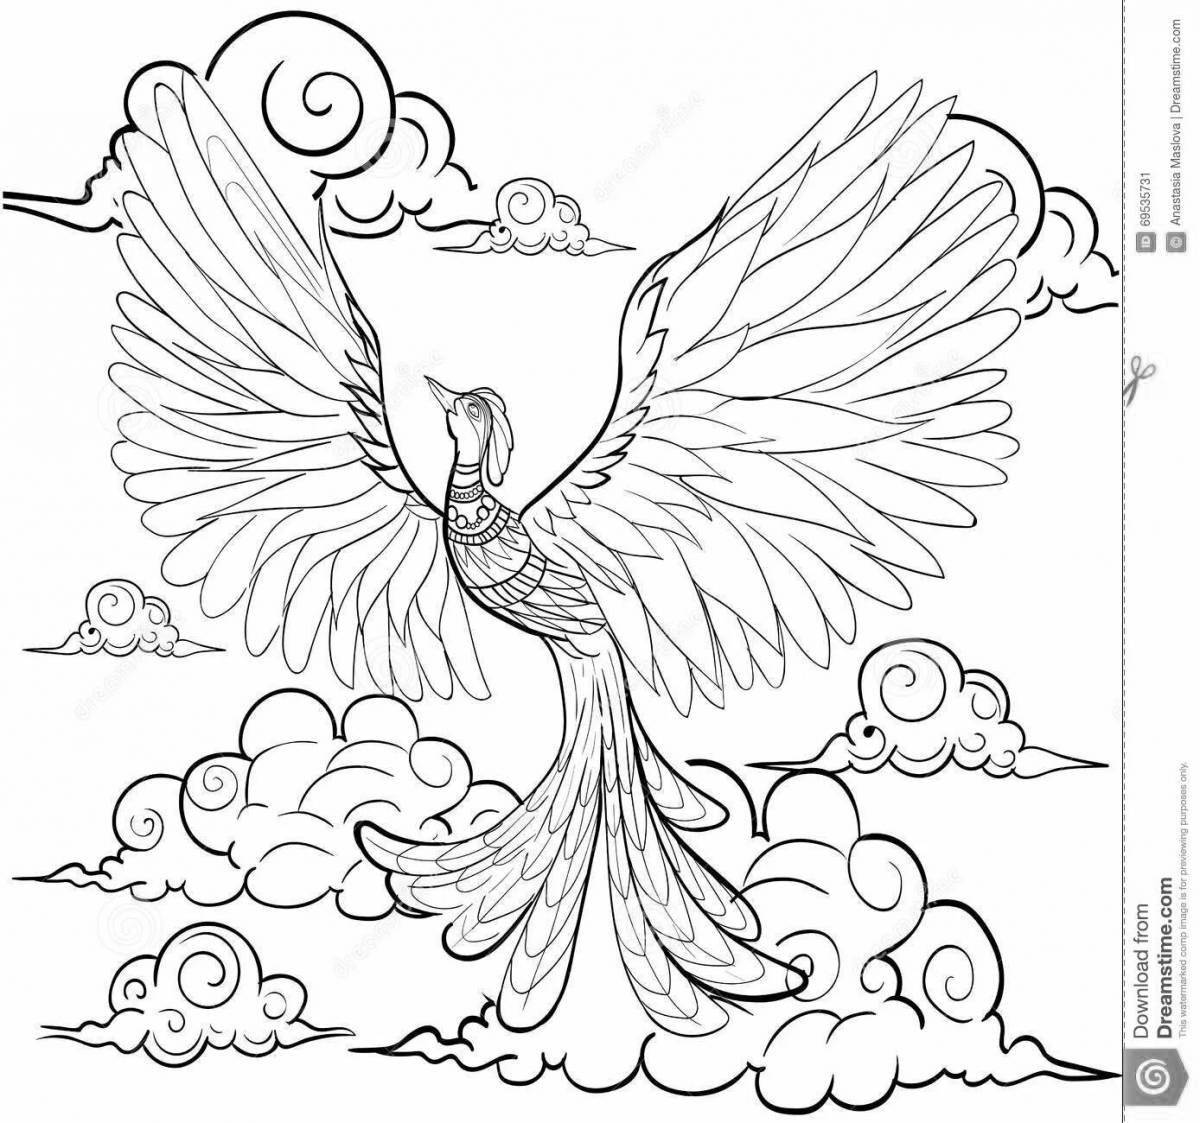 Colorfully detailed Ivan Tsarevich and the Firebird coloring book